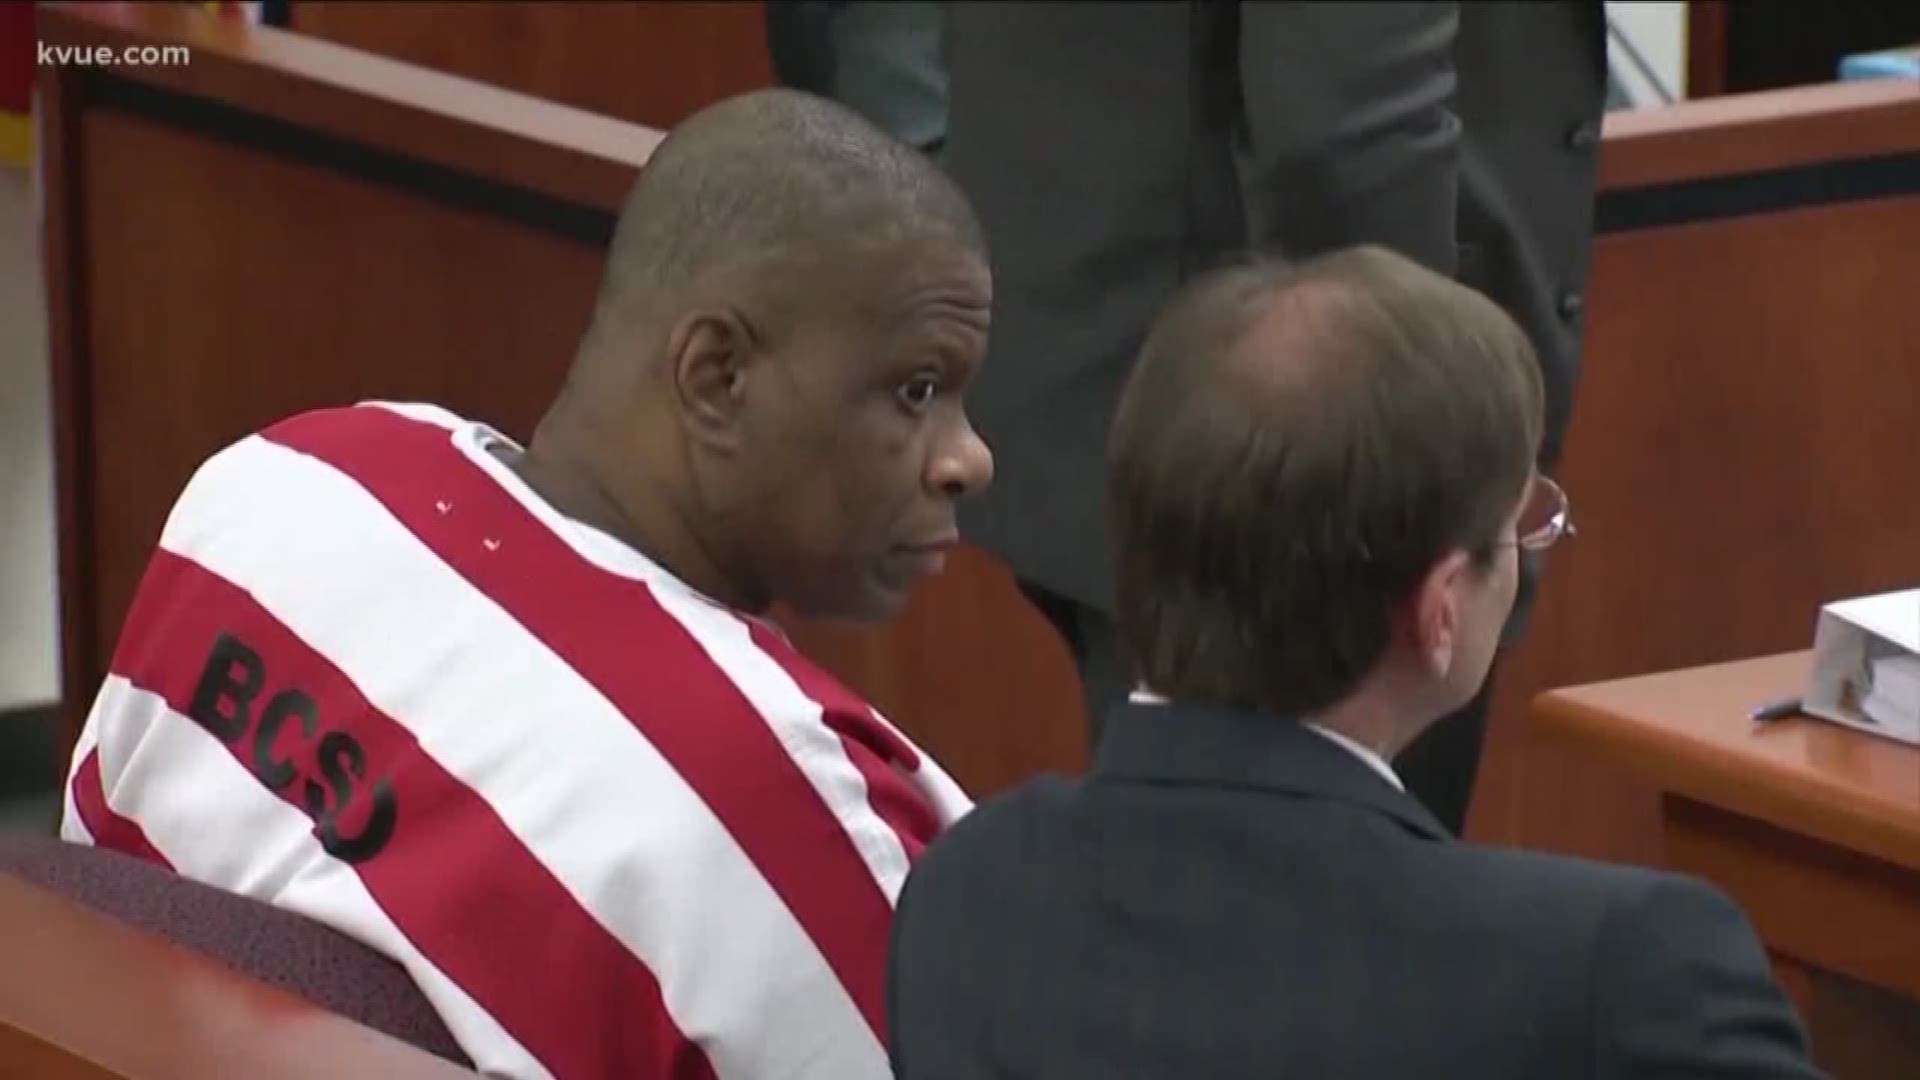 A new judge will preside over the case of death row inmate Rodney Reed.